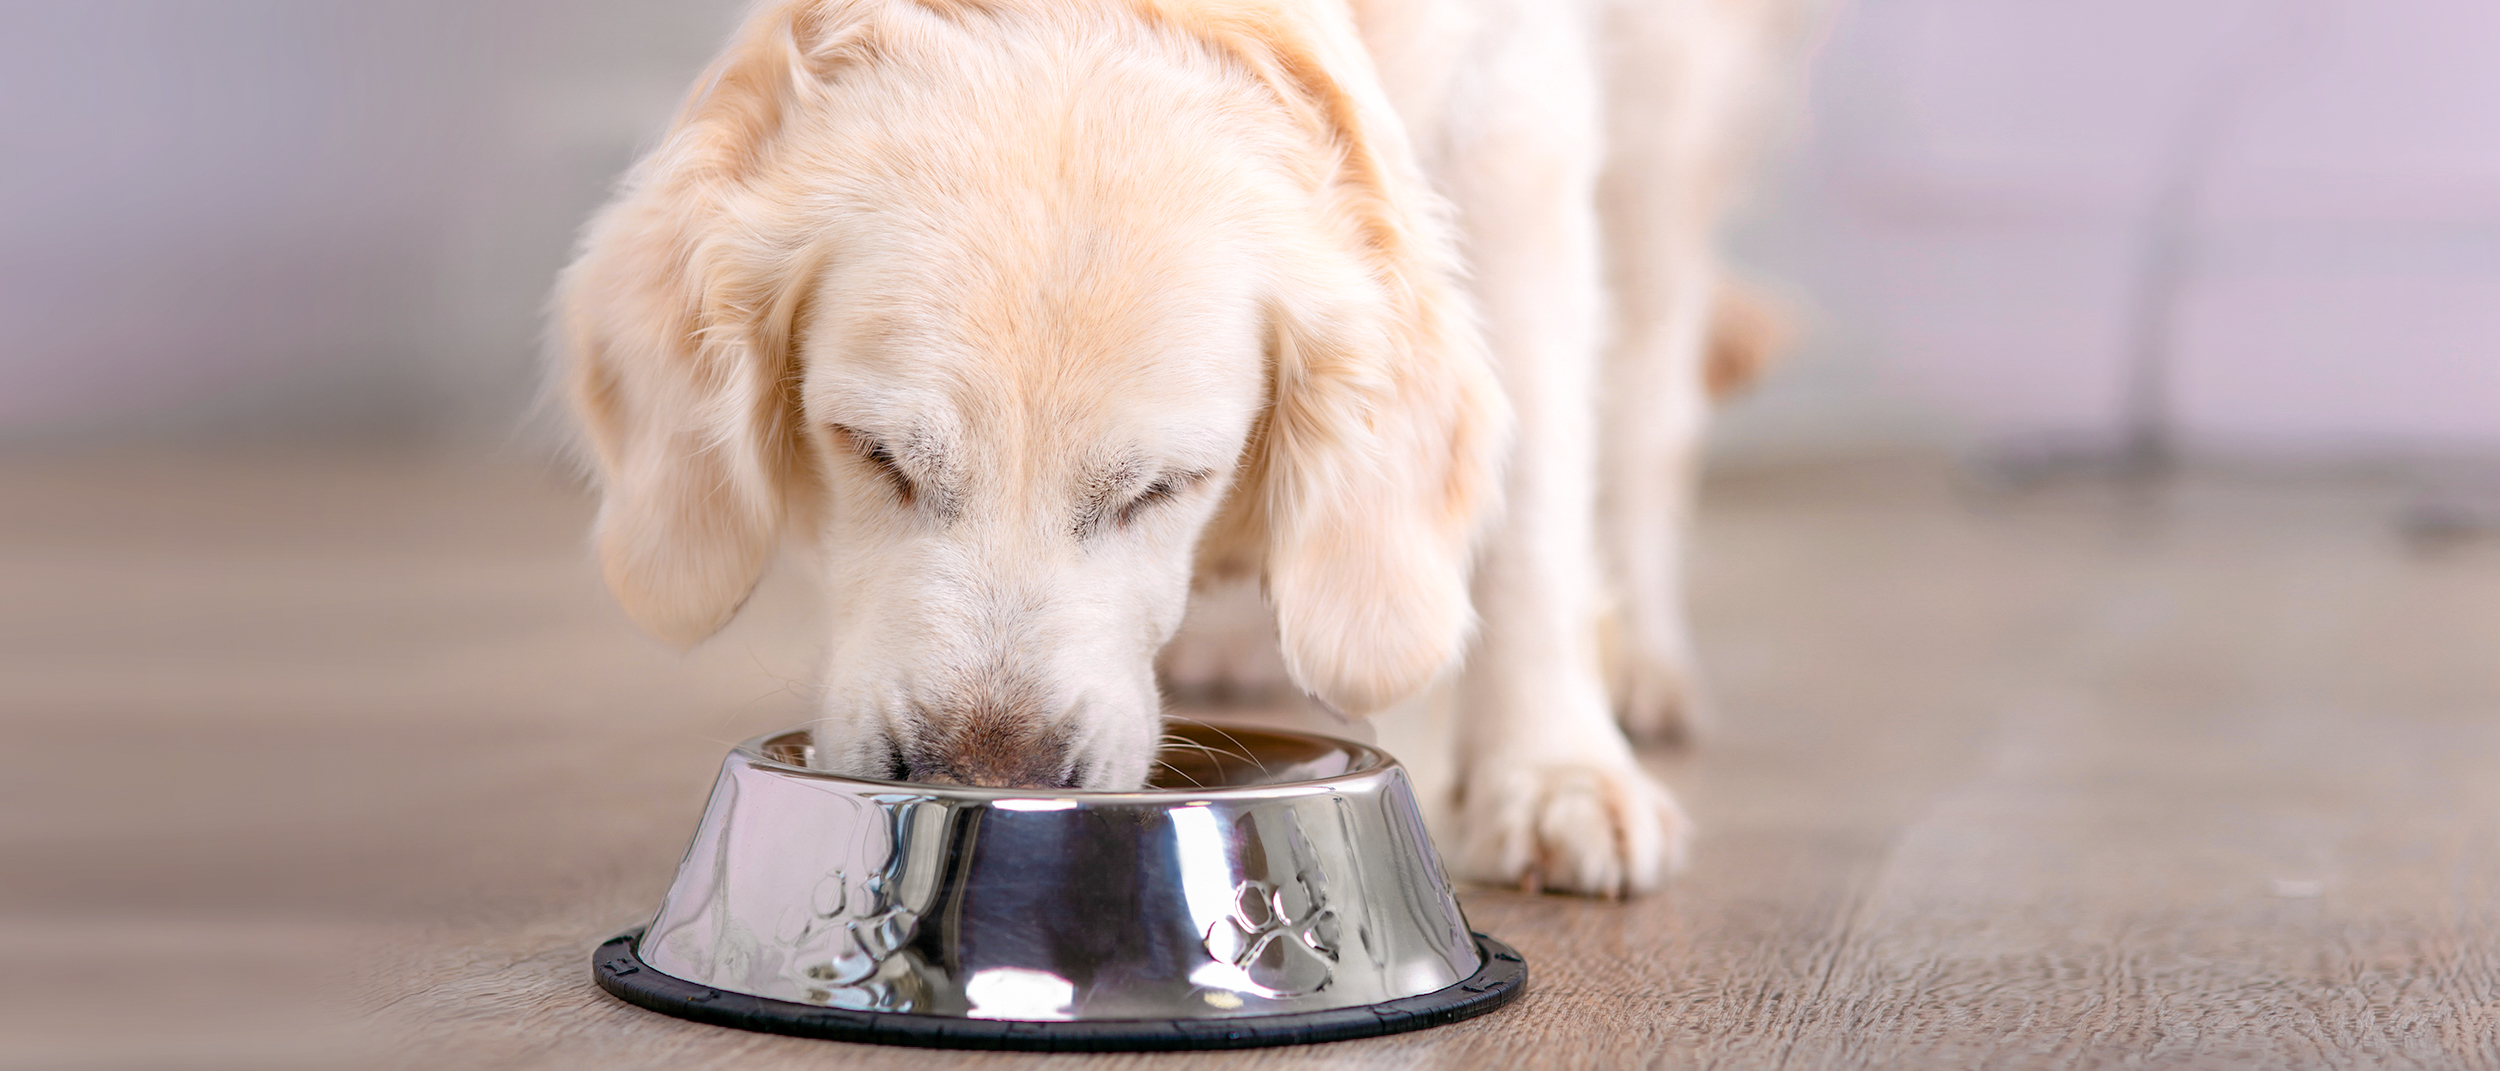 Adult Golden Retriever standing indoors eating from a silver bowl.